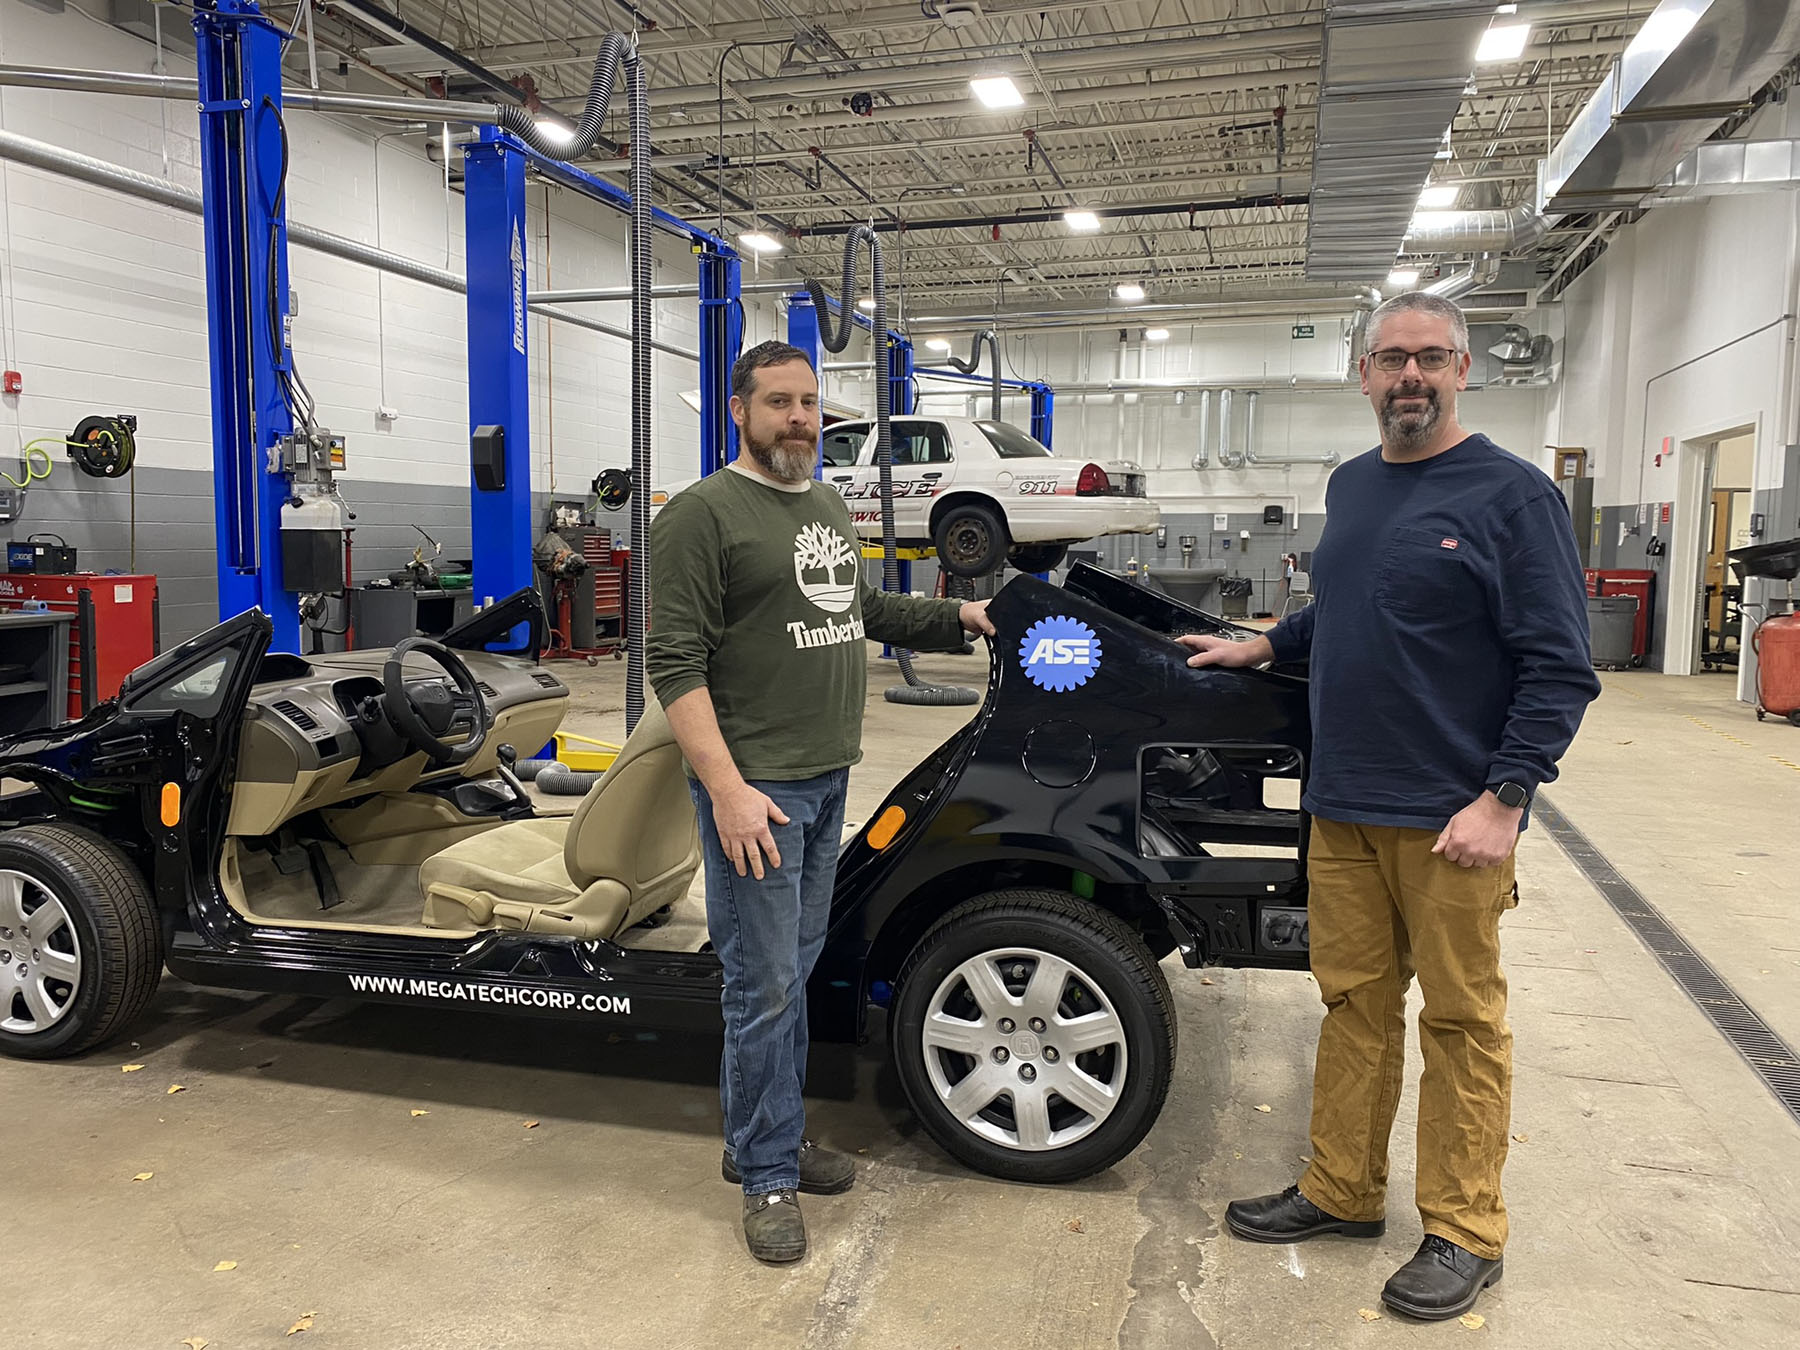 MWCC adds two new automotive instructors